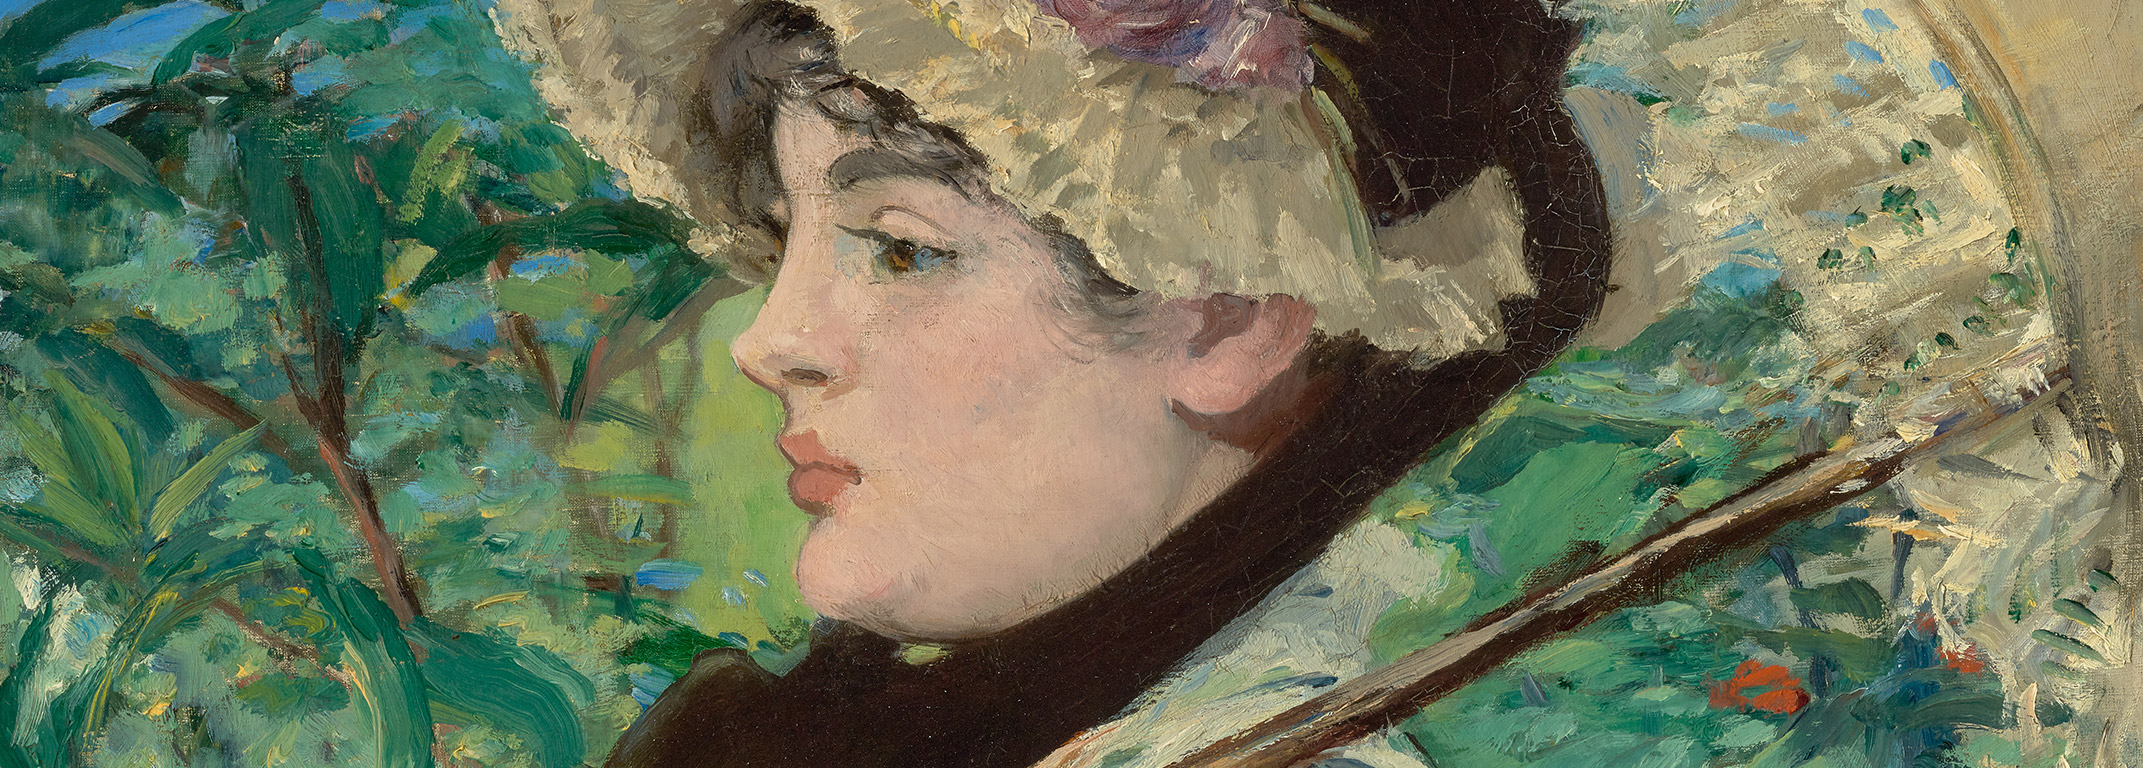 Jeanne (Spring) (detail), 1881, Édouard Manet, oil on canvas. The J. Paul Getty Museum